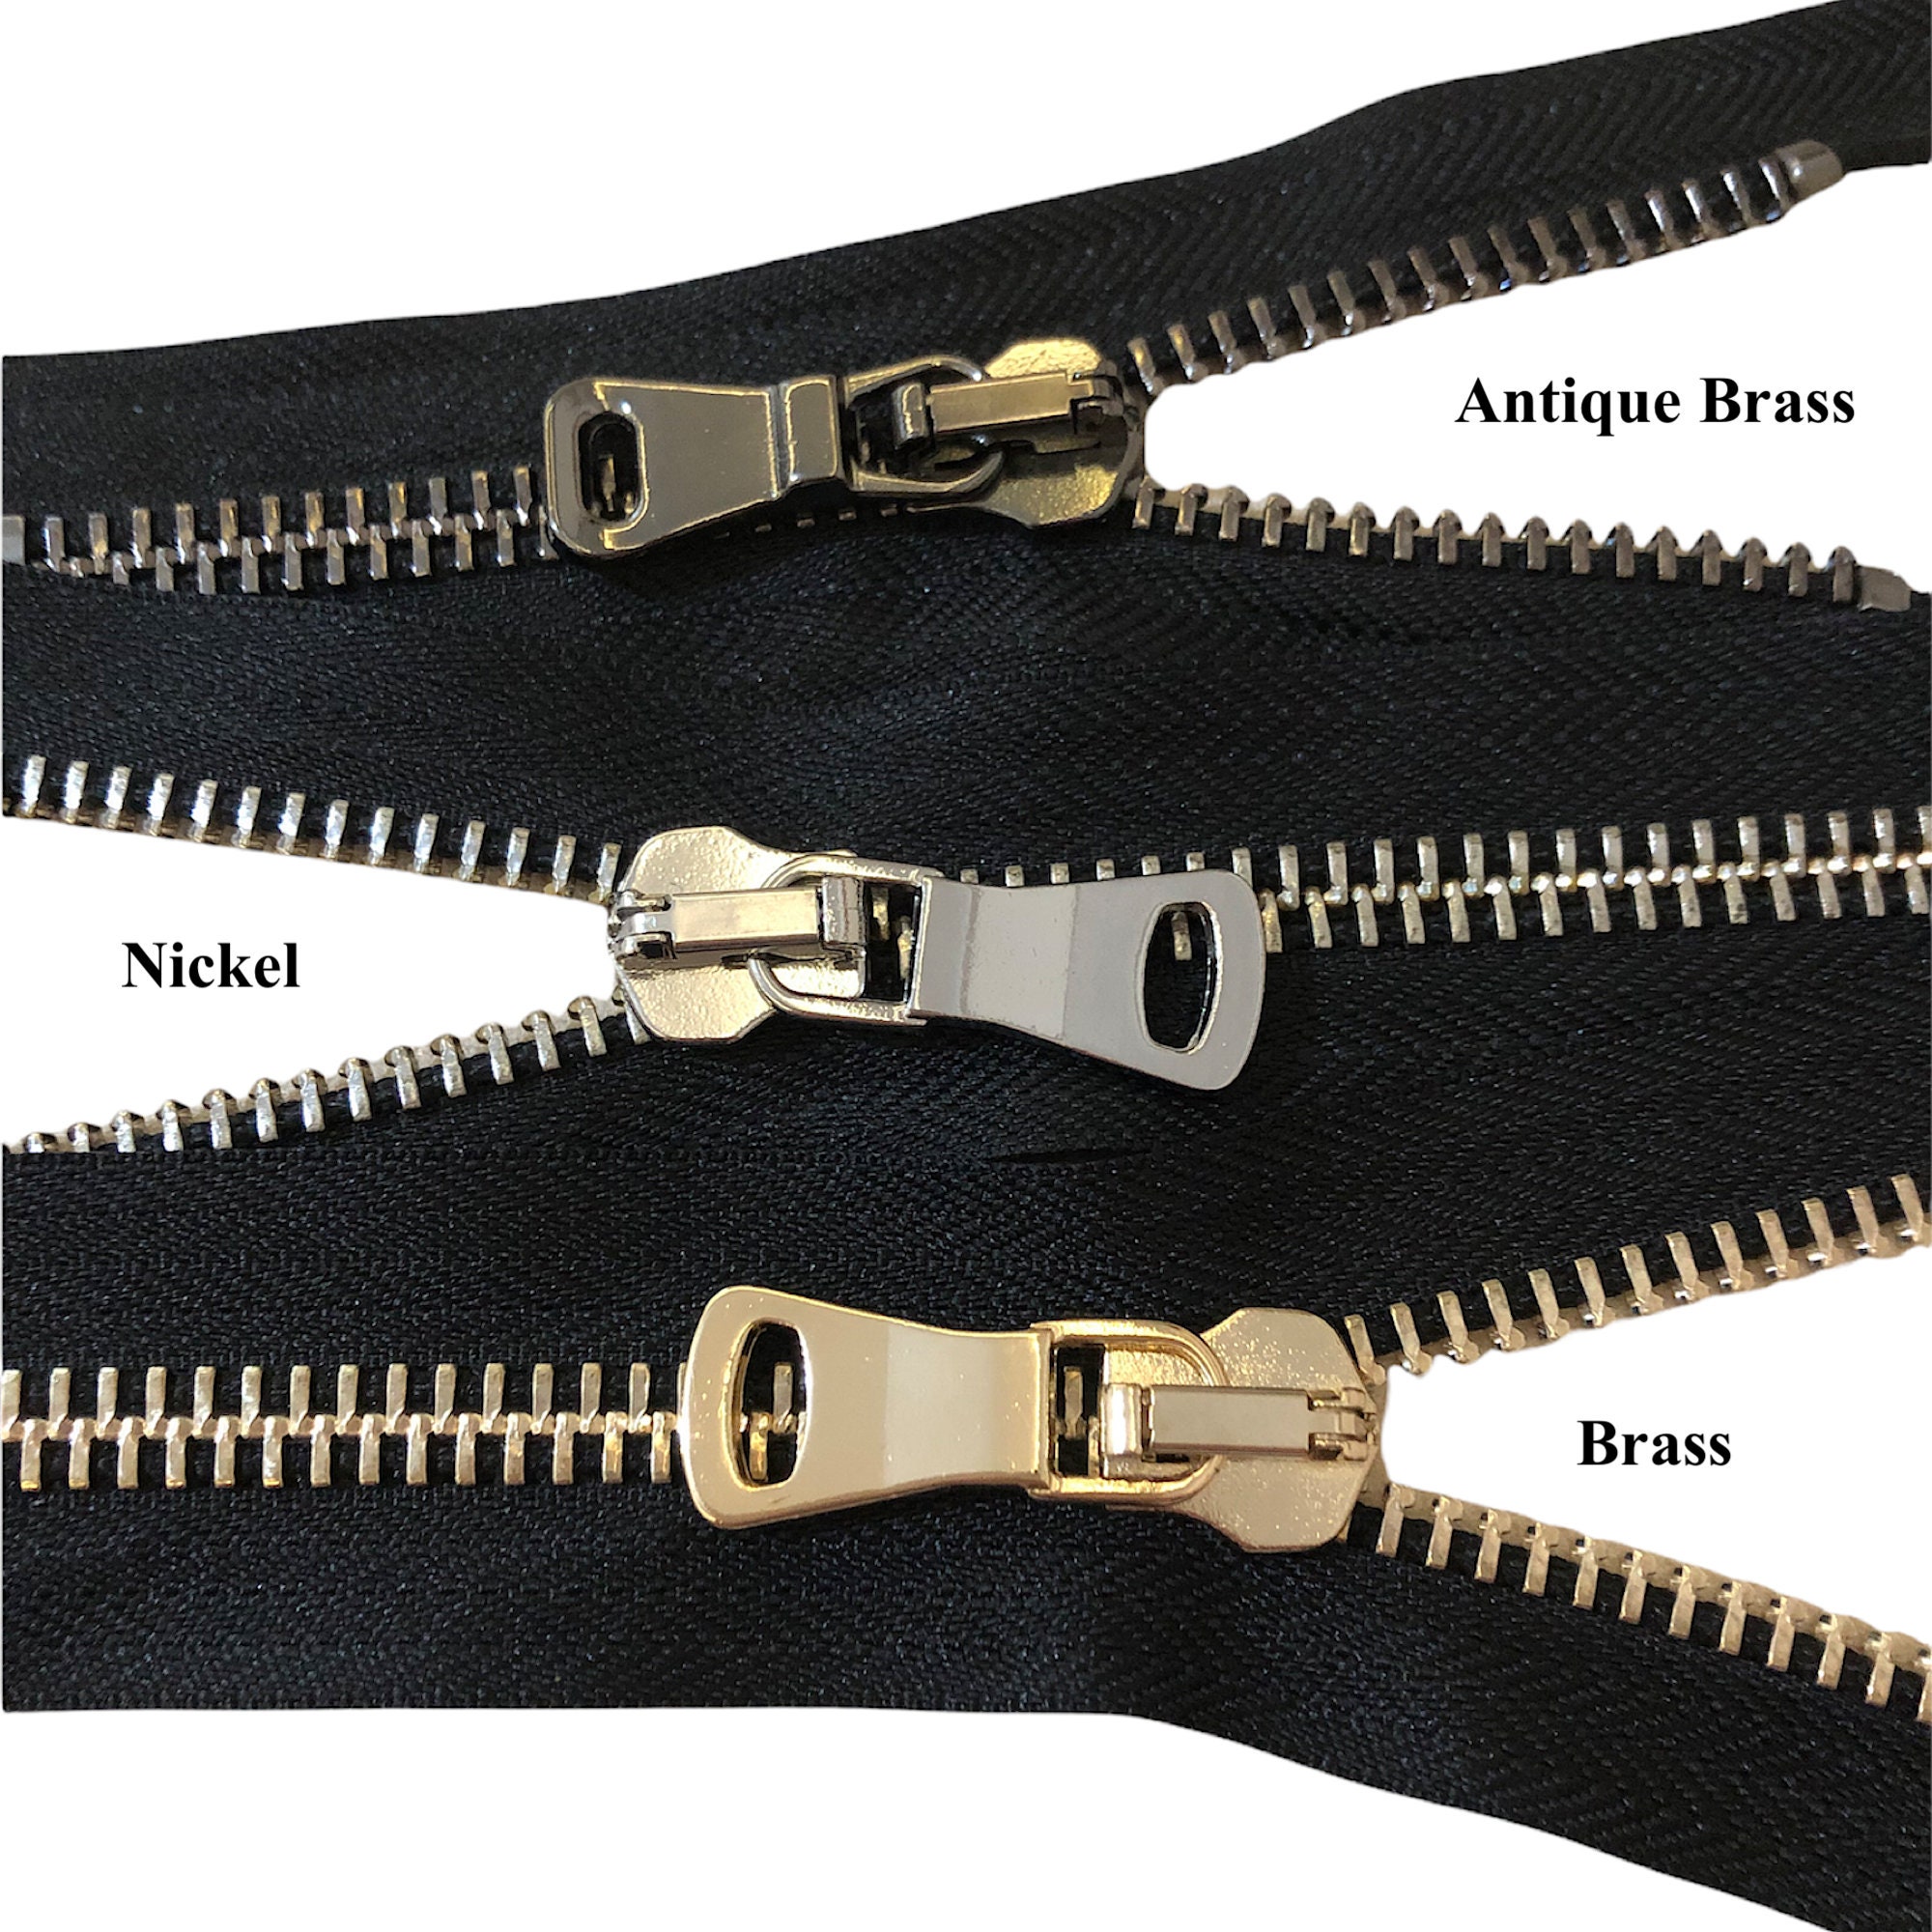 Luxury Gold Silver Teeth Zippers, One Way Metal Zippers for Jackets & Chaps  5 BRASS Opening Select Color and Length 